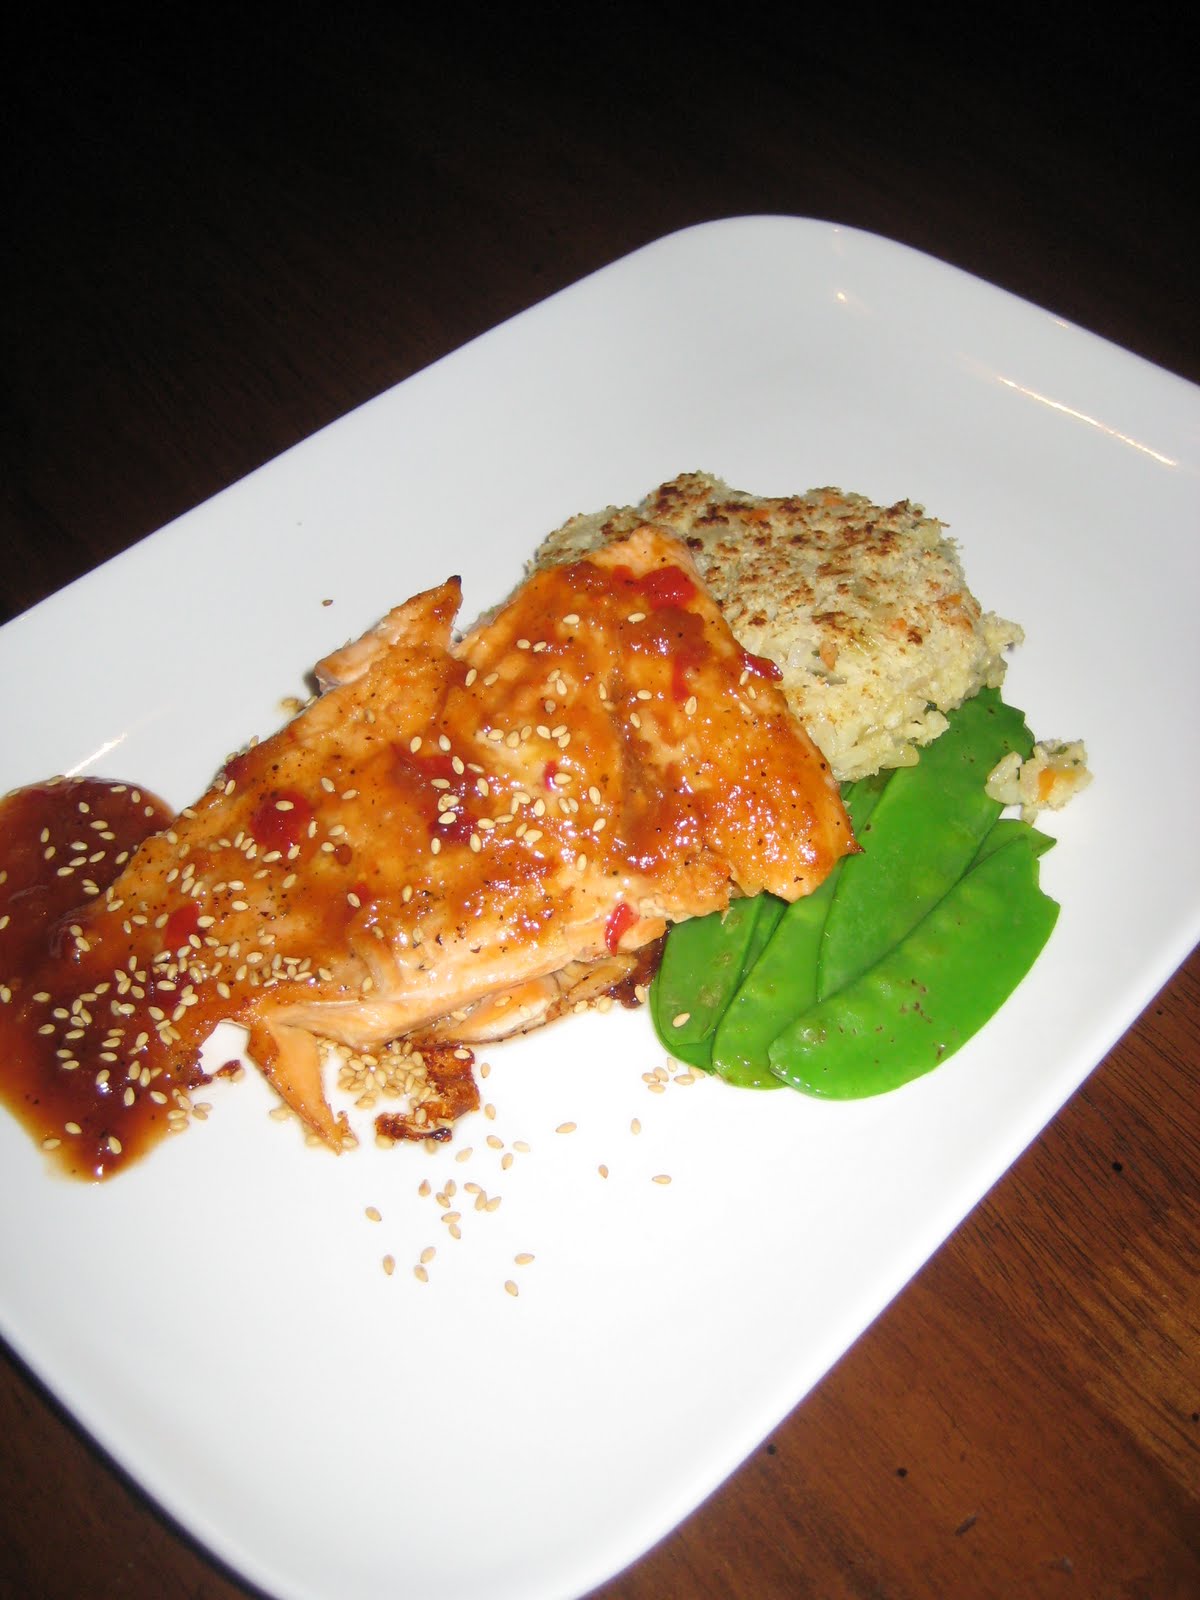 Bring Out The Chef In You: Plum Glazed Salmon with Gingered Rice Pilaf Cake